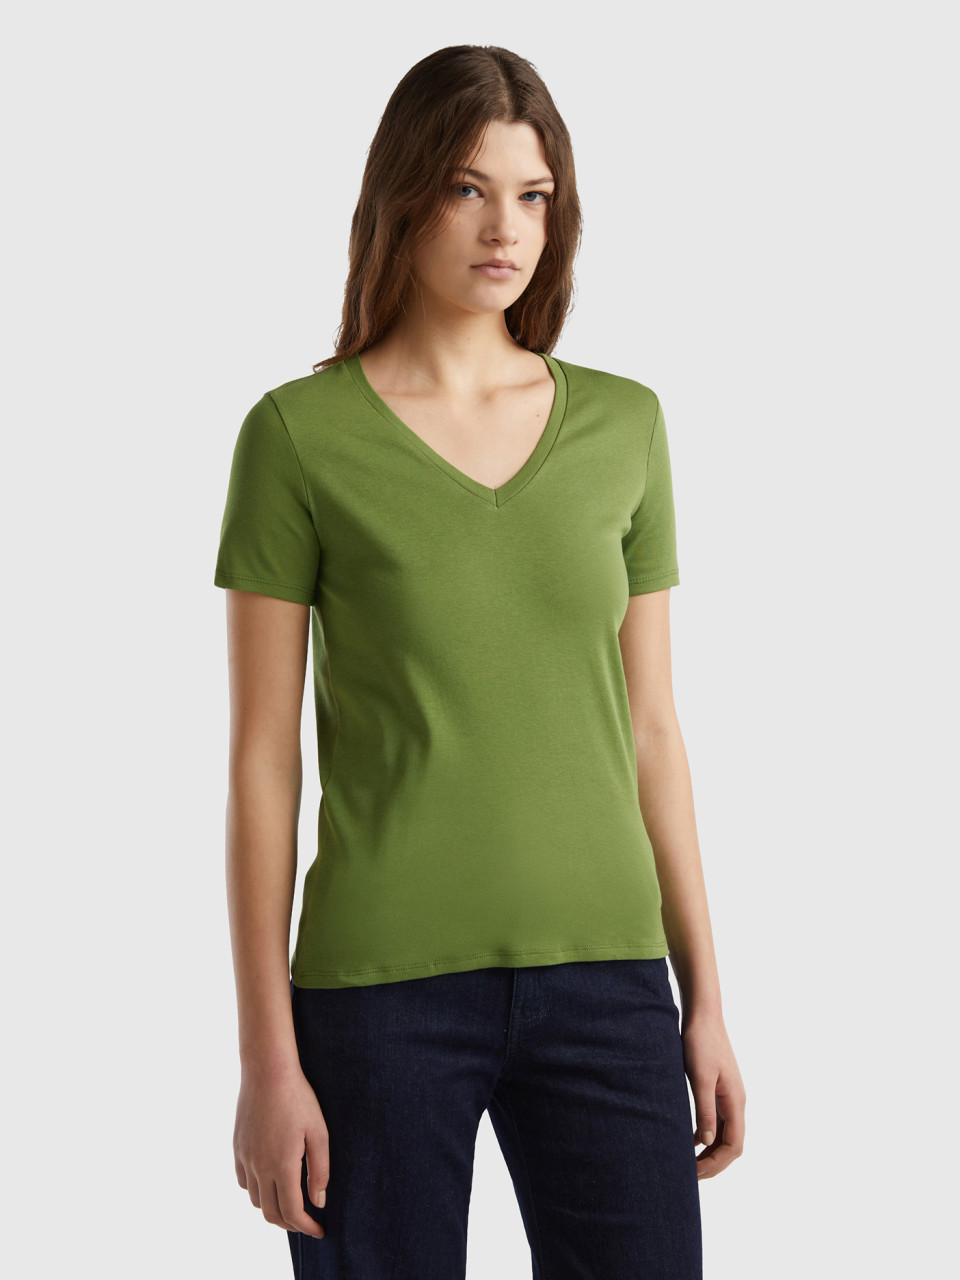 Benetton, Pure Cotton T-shirt With V-neck, Military Green, Women